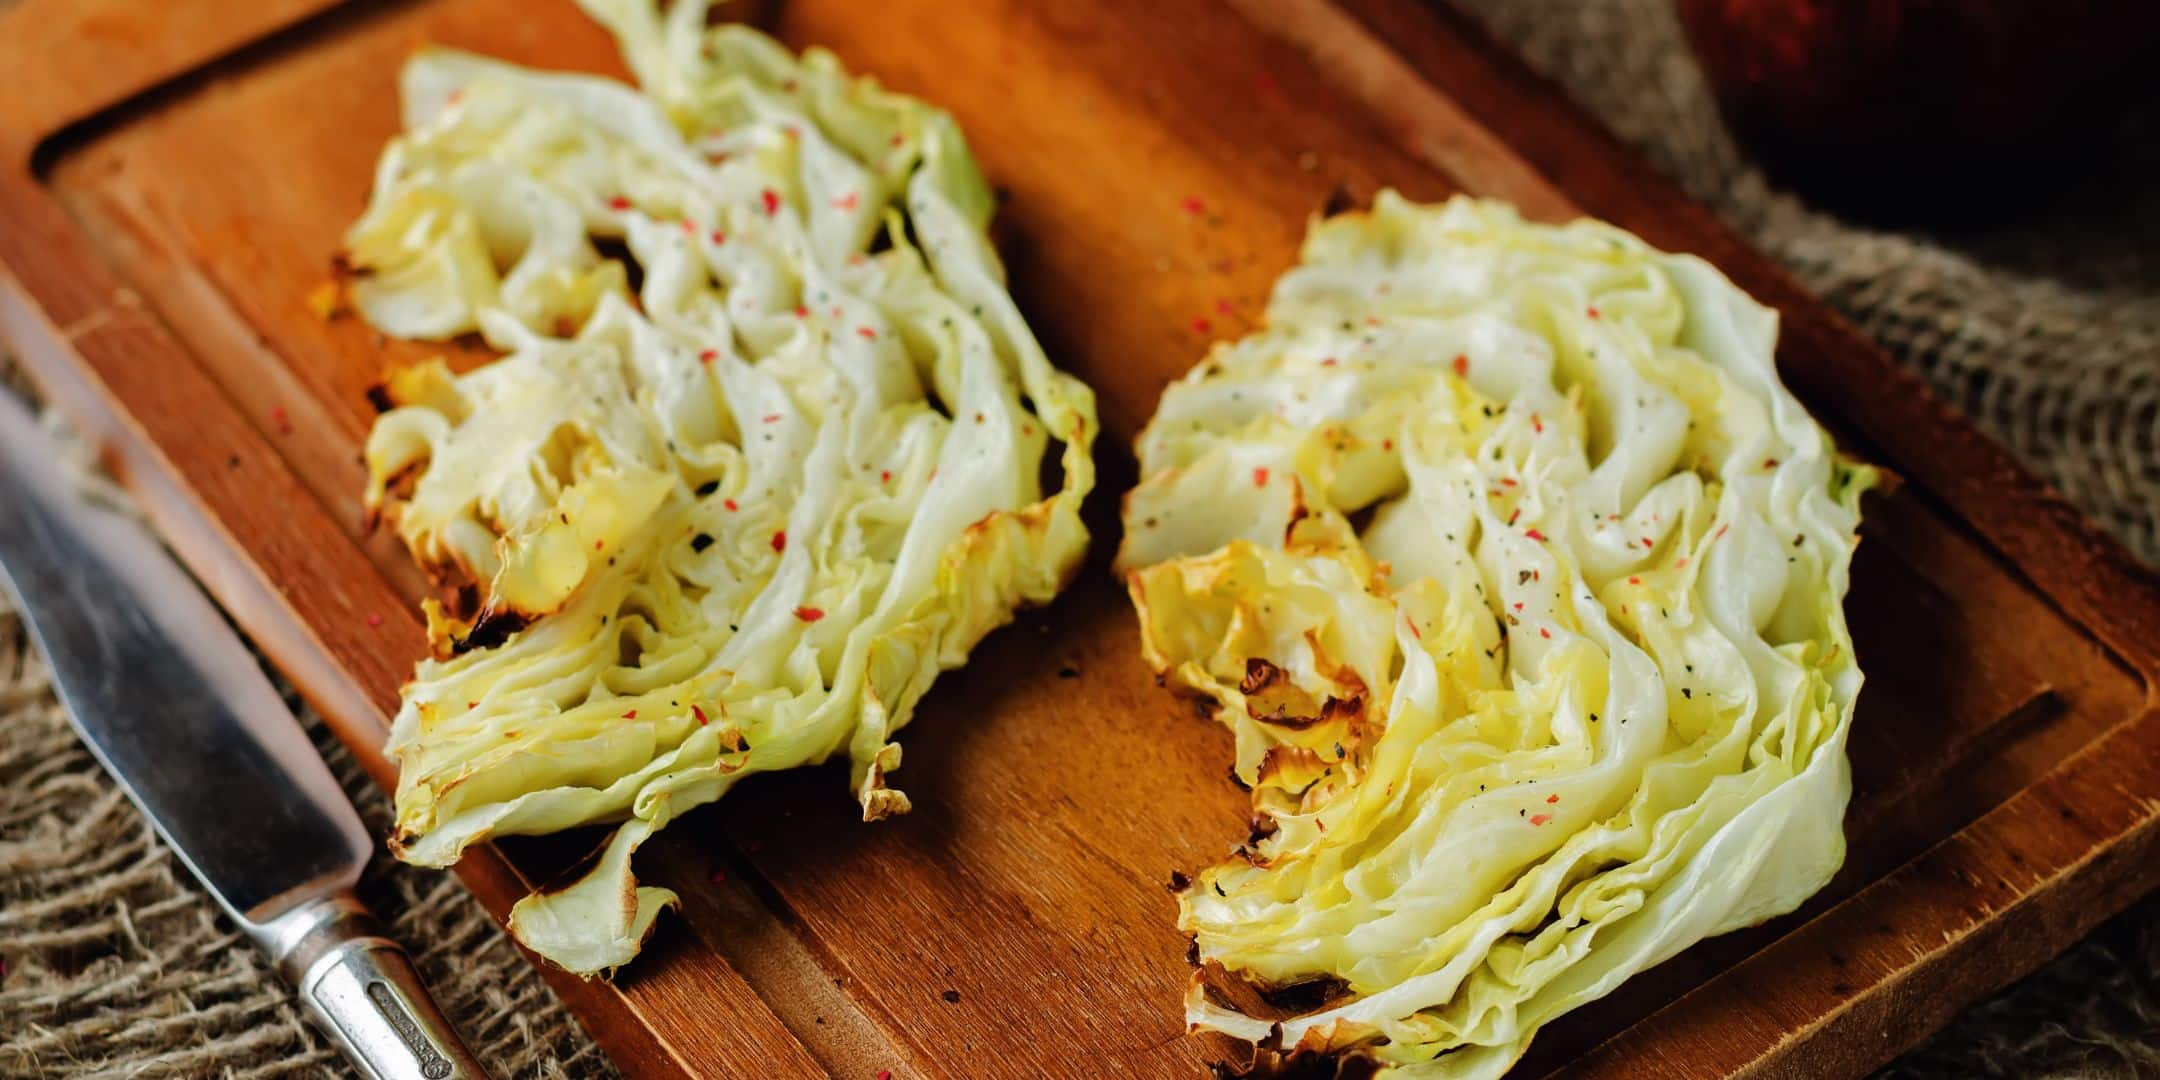 roasted cabbage with red pepper flakes on cutting board with butter knife